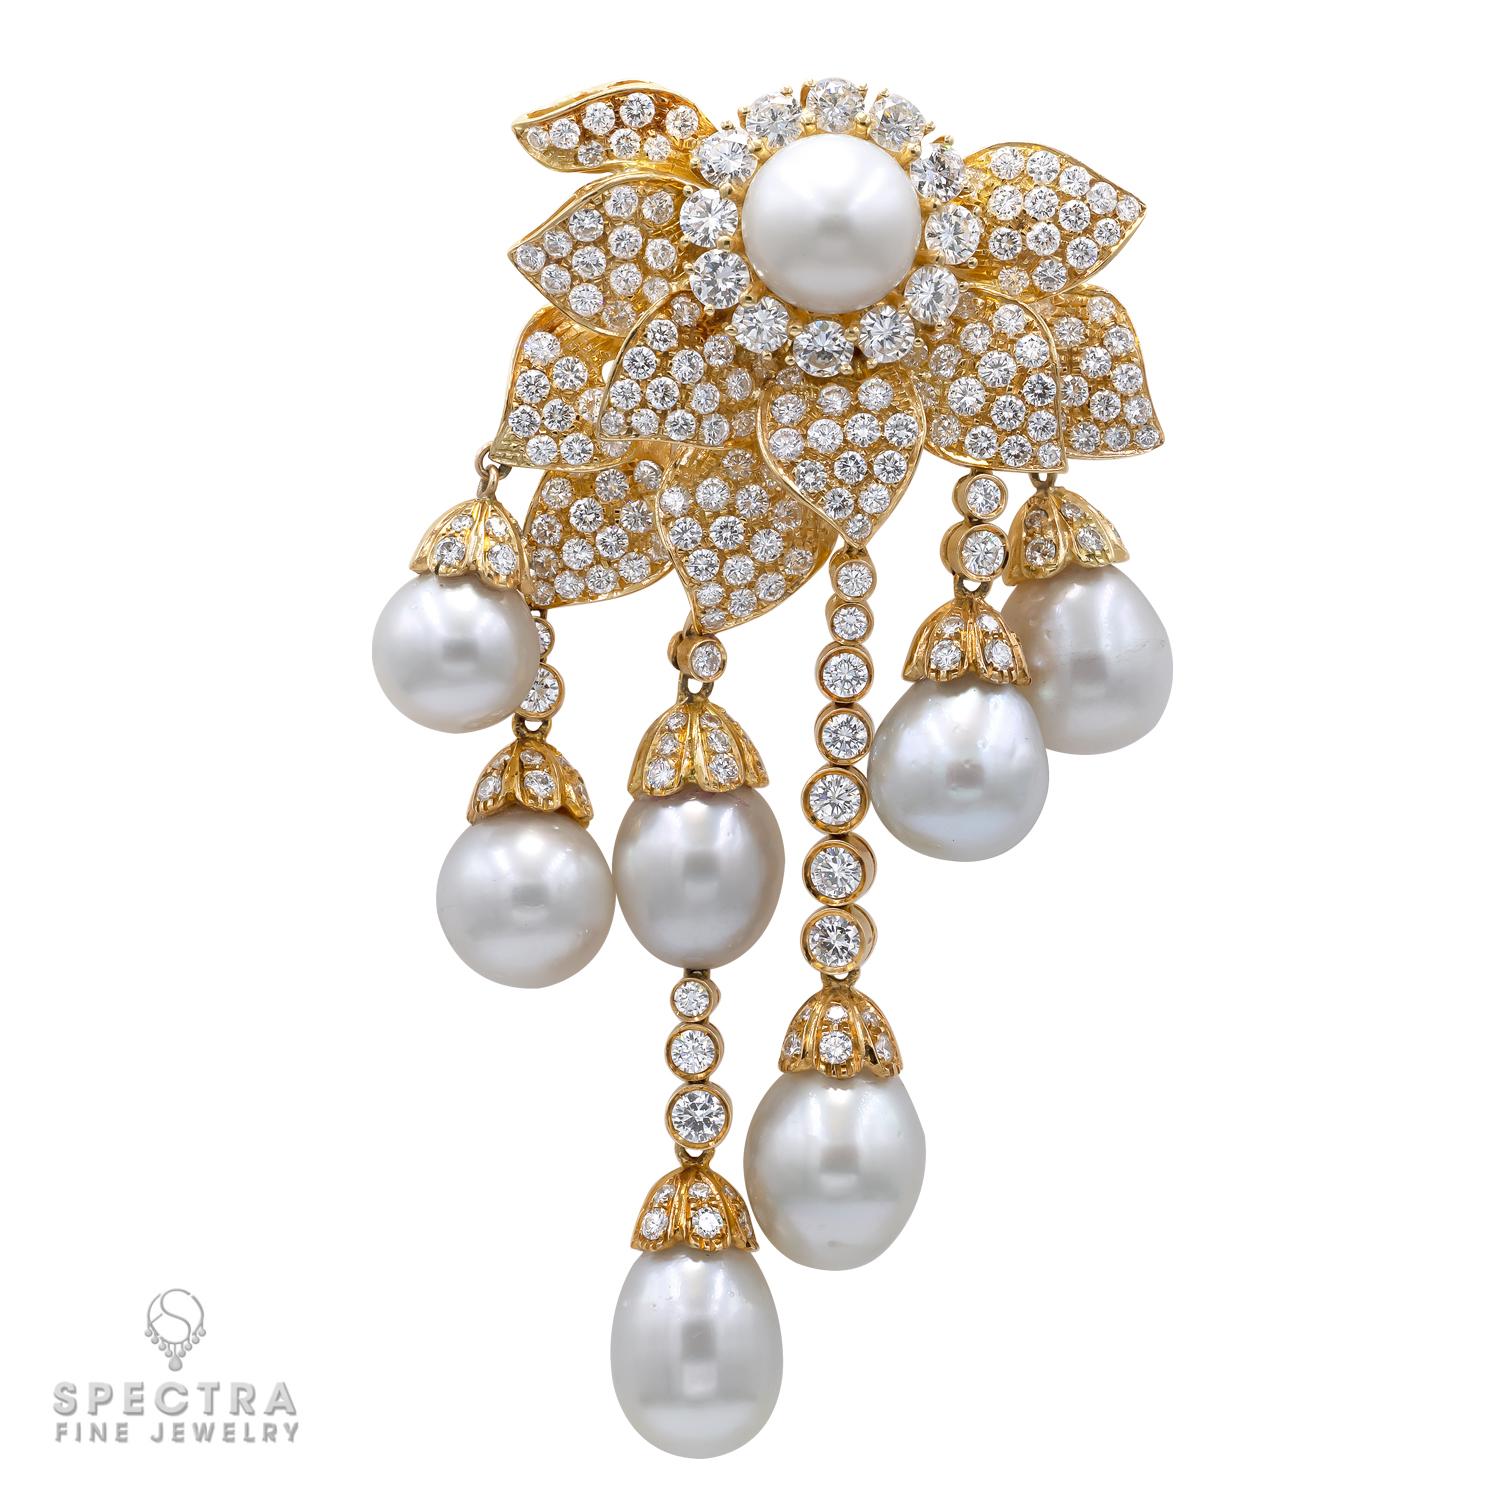 Introducing a luxurious and timeless jewelry set that seamlessly blends the classic allure of pearls with the eternal sparkle of diamonds, all set in the warmth of 18K yellow gold. This stunning Diamond Pearl Brooch, Earrings, and Ring Set is an